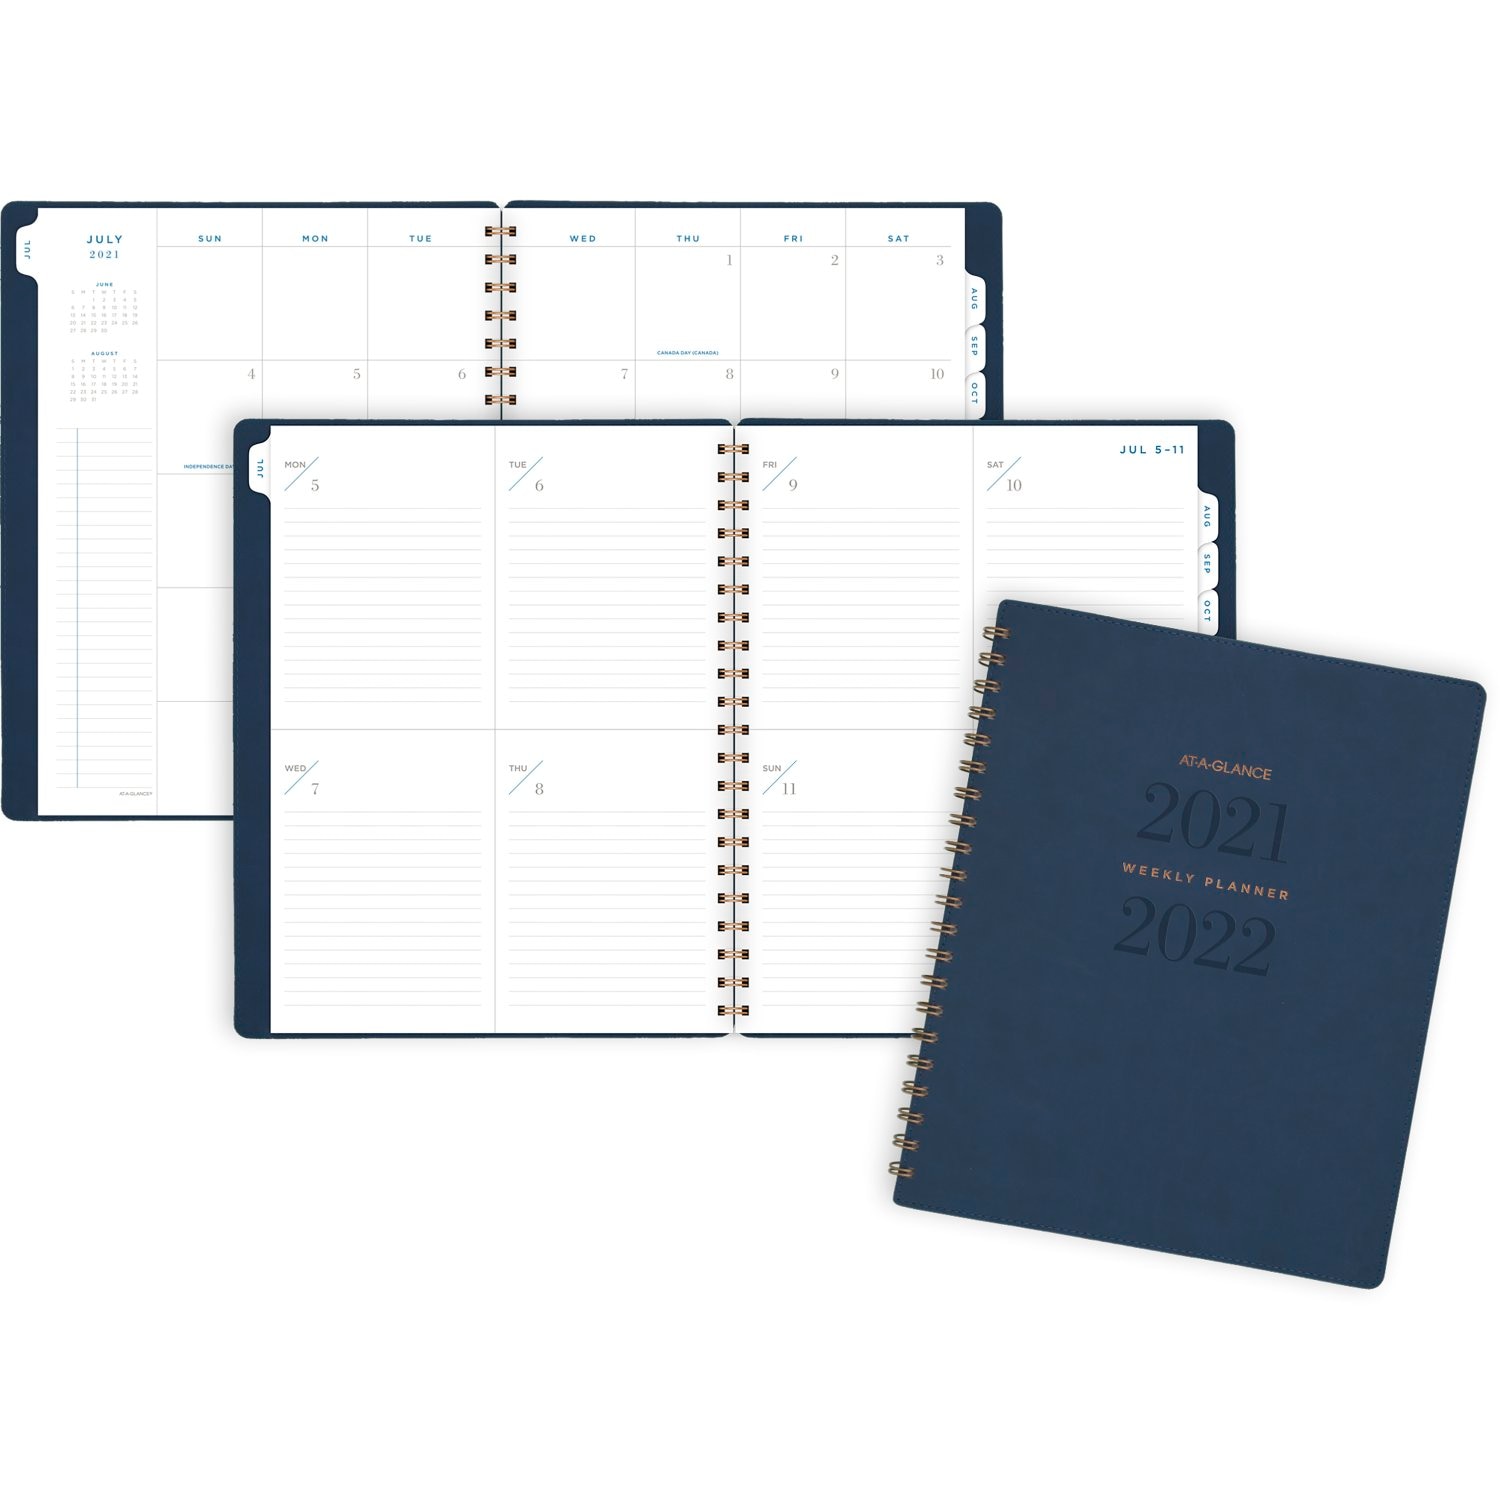 At A Glance Navy Academic Year 21-22 Planner 8x11